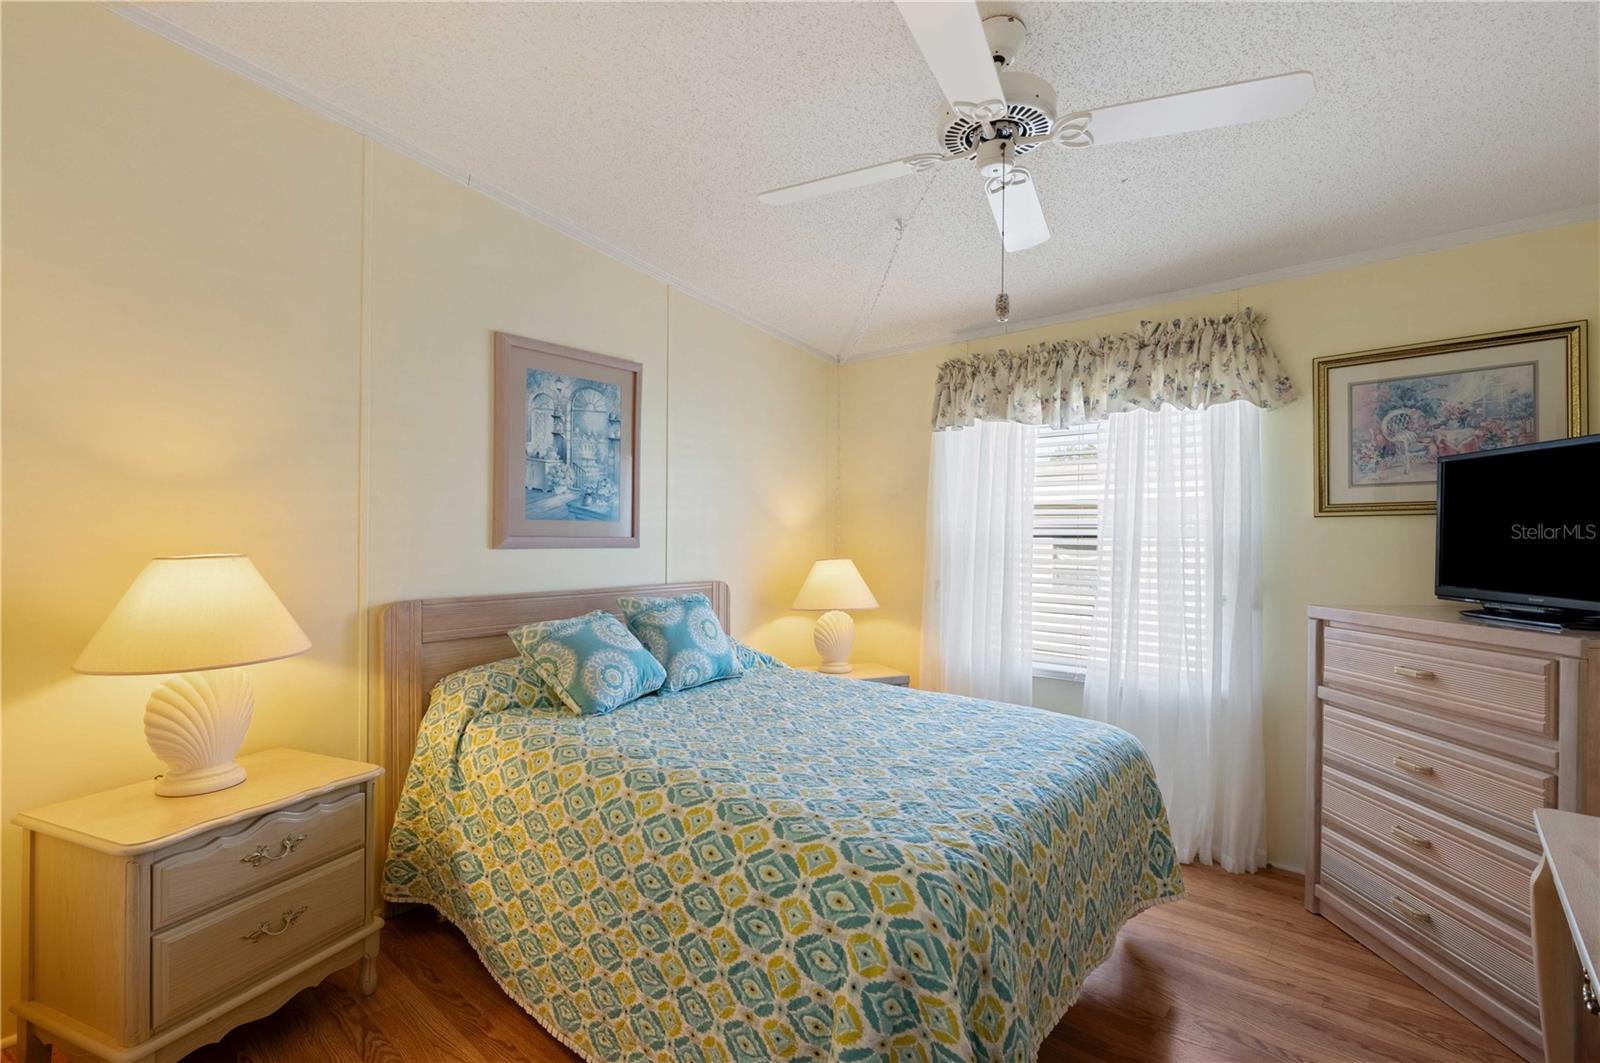 Bedroom #2 has laminate flooring, ceiling fan, and fully furnished.